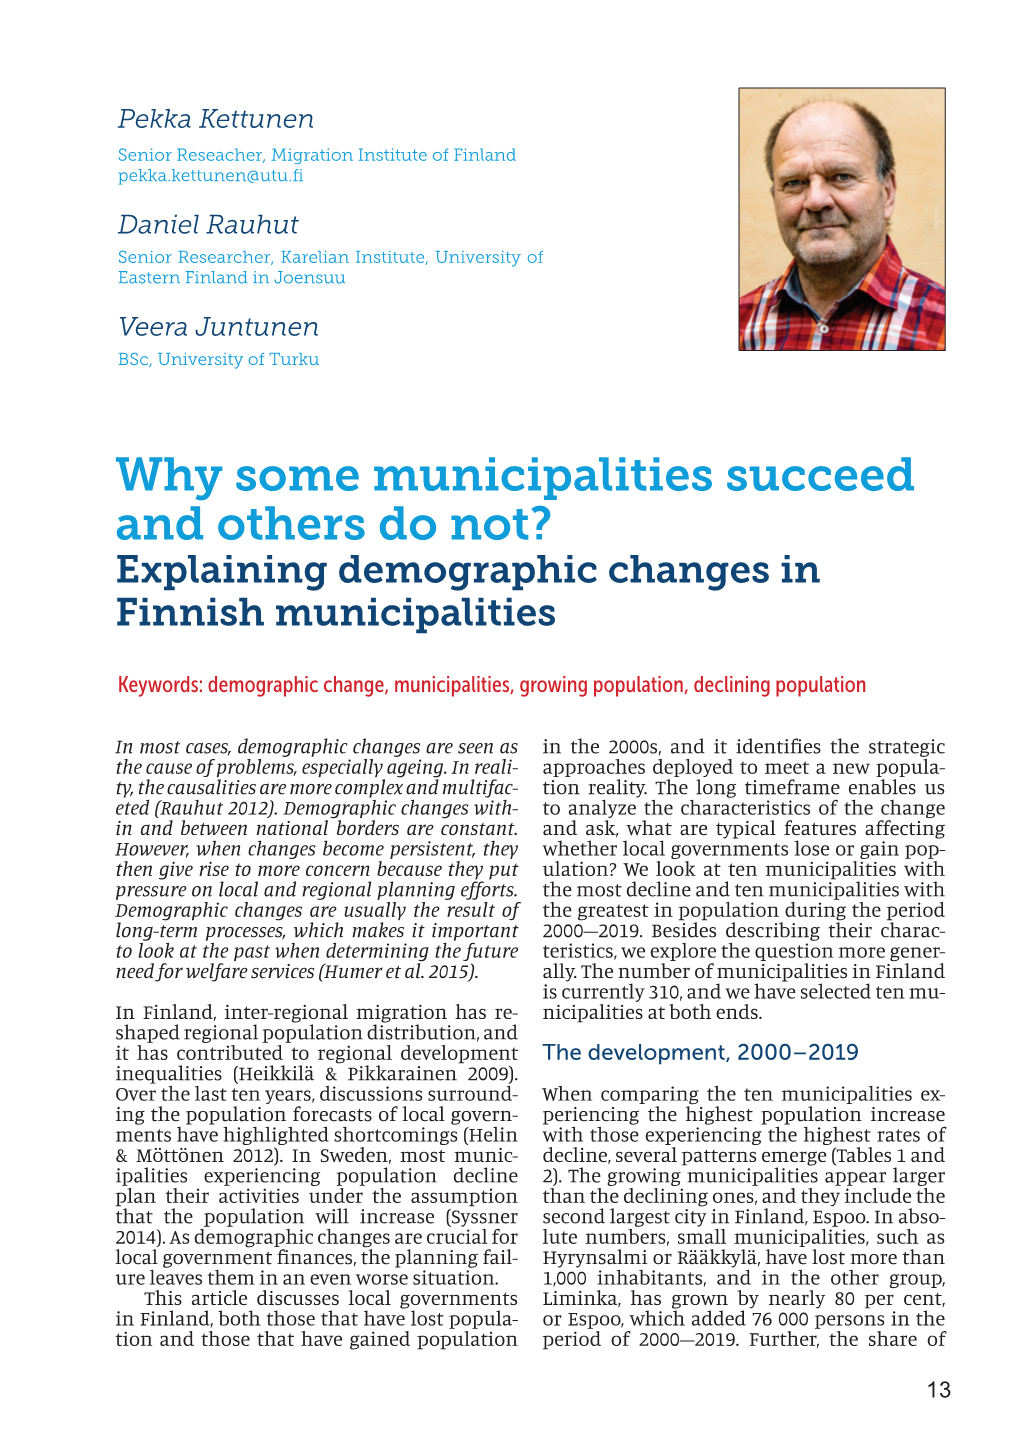 Why Some Municipalities Succeed and Others Do Not? Explaining Demographic Changes in Finnish Municipalities